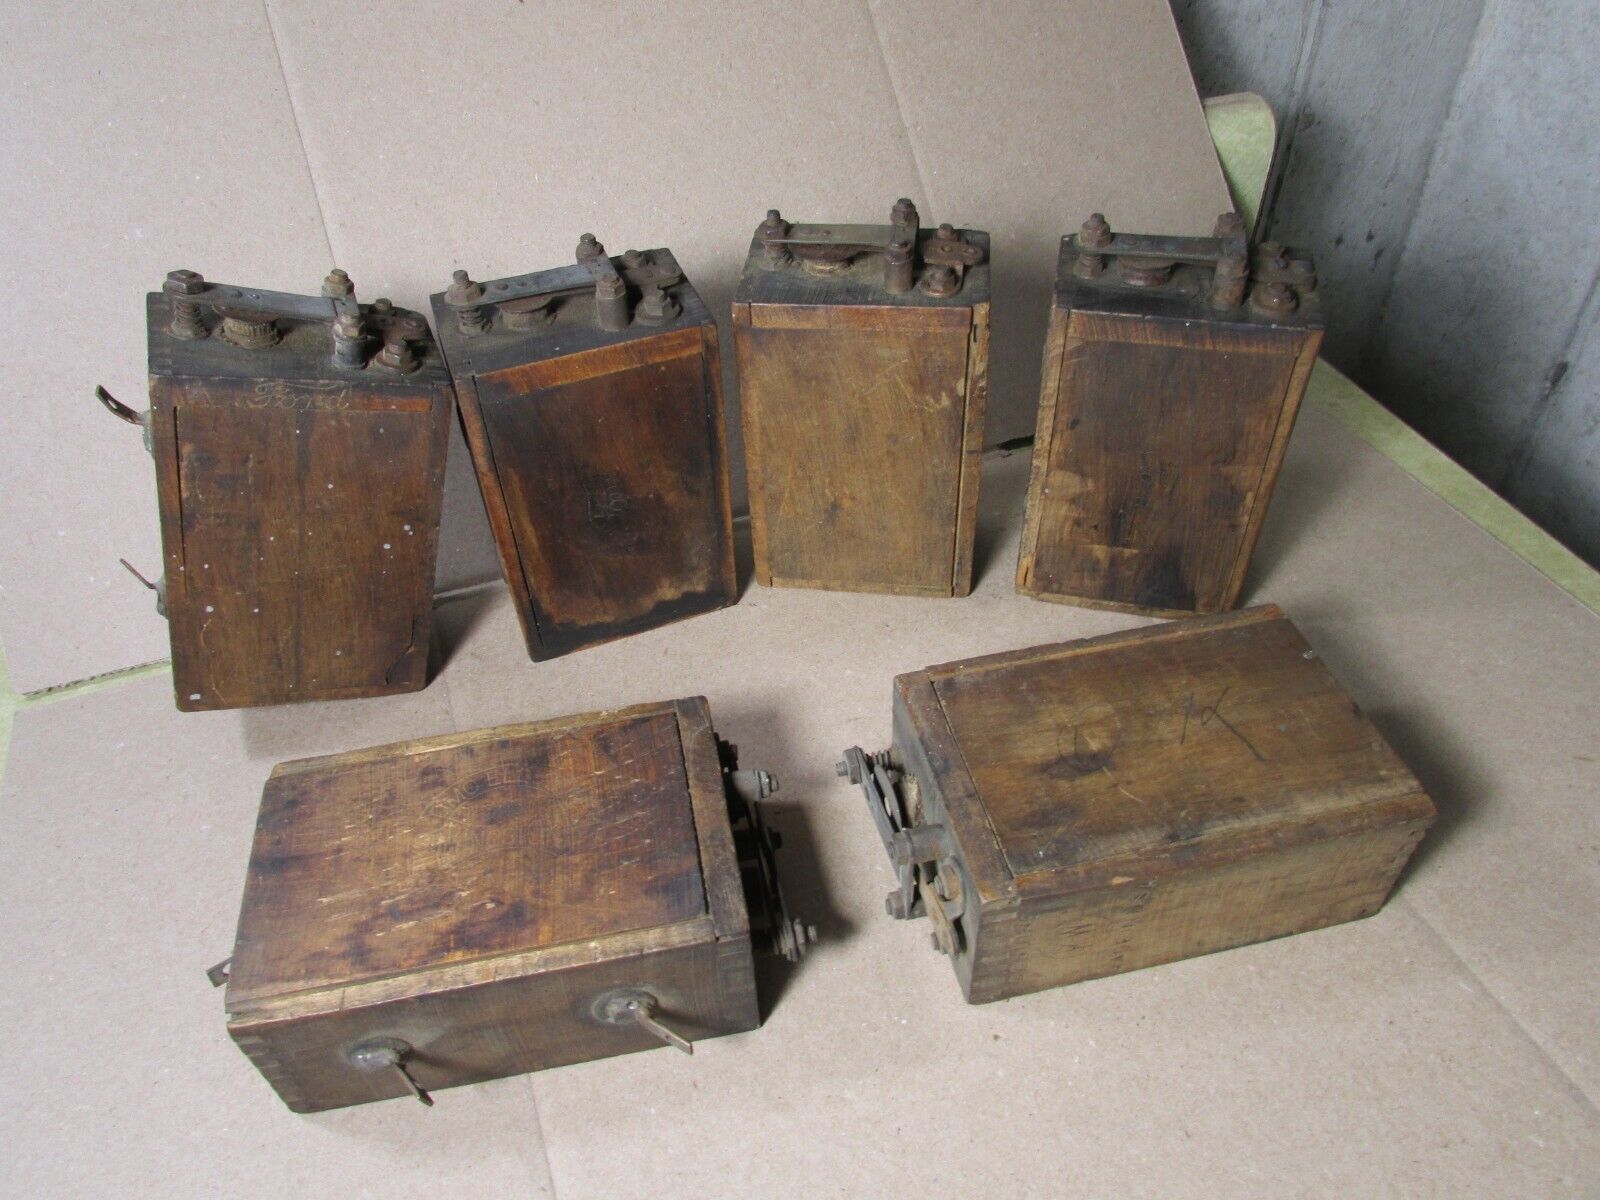 Lot of 6 Vintage / Antique Ford Model T Ignition Coils Wood Boxes